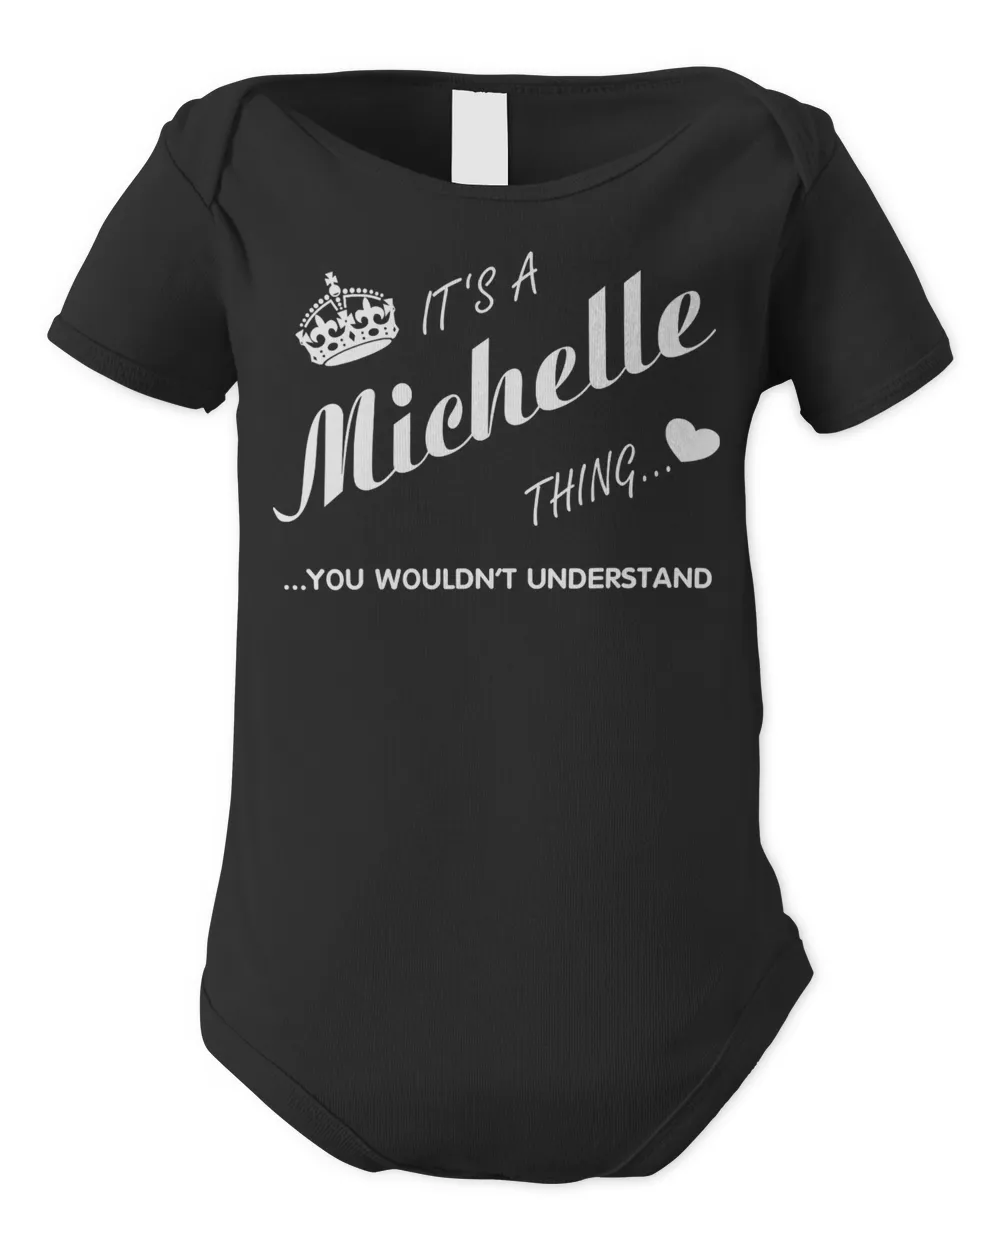 It's a Michelle thing you tshirt-Michelle t shirt-Name shirt